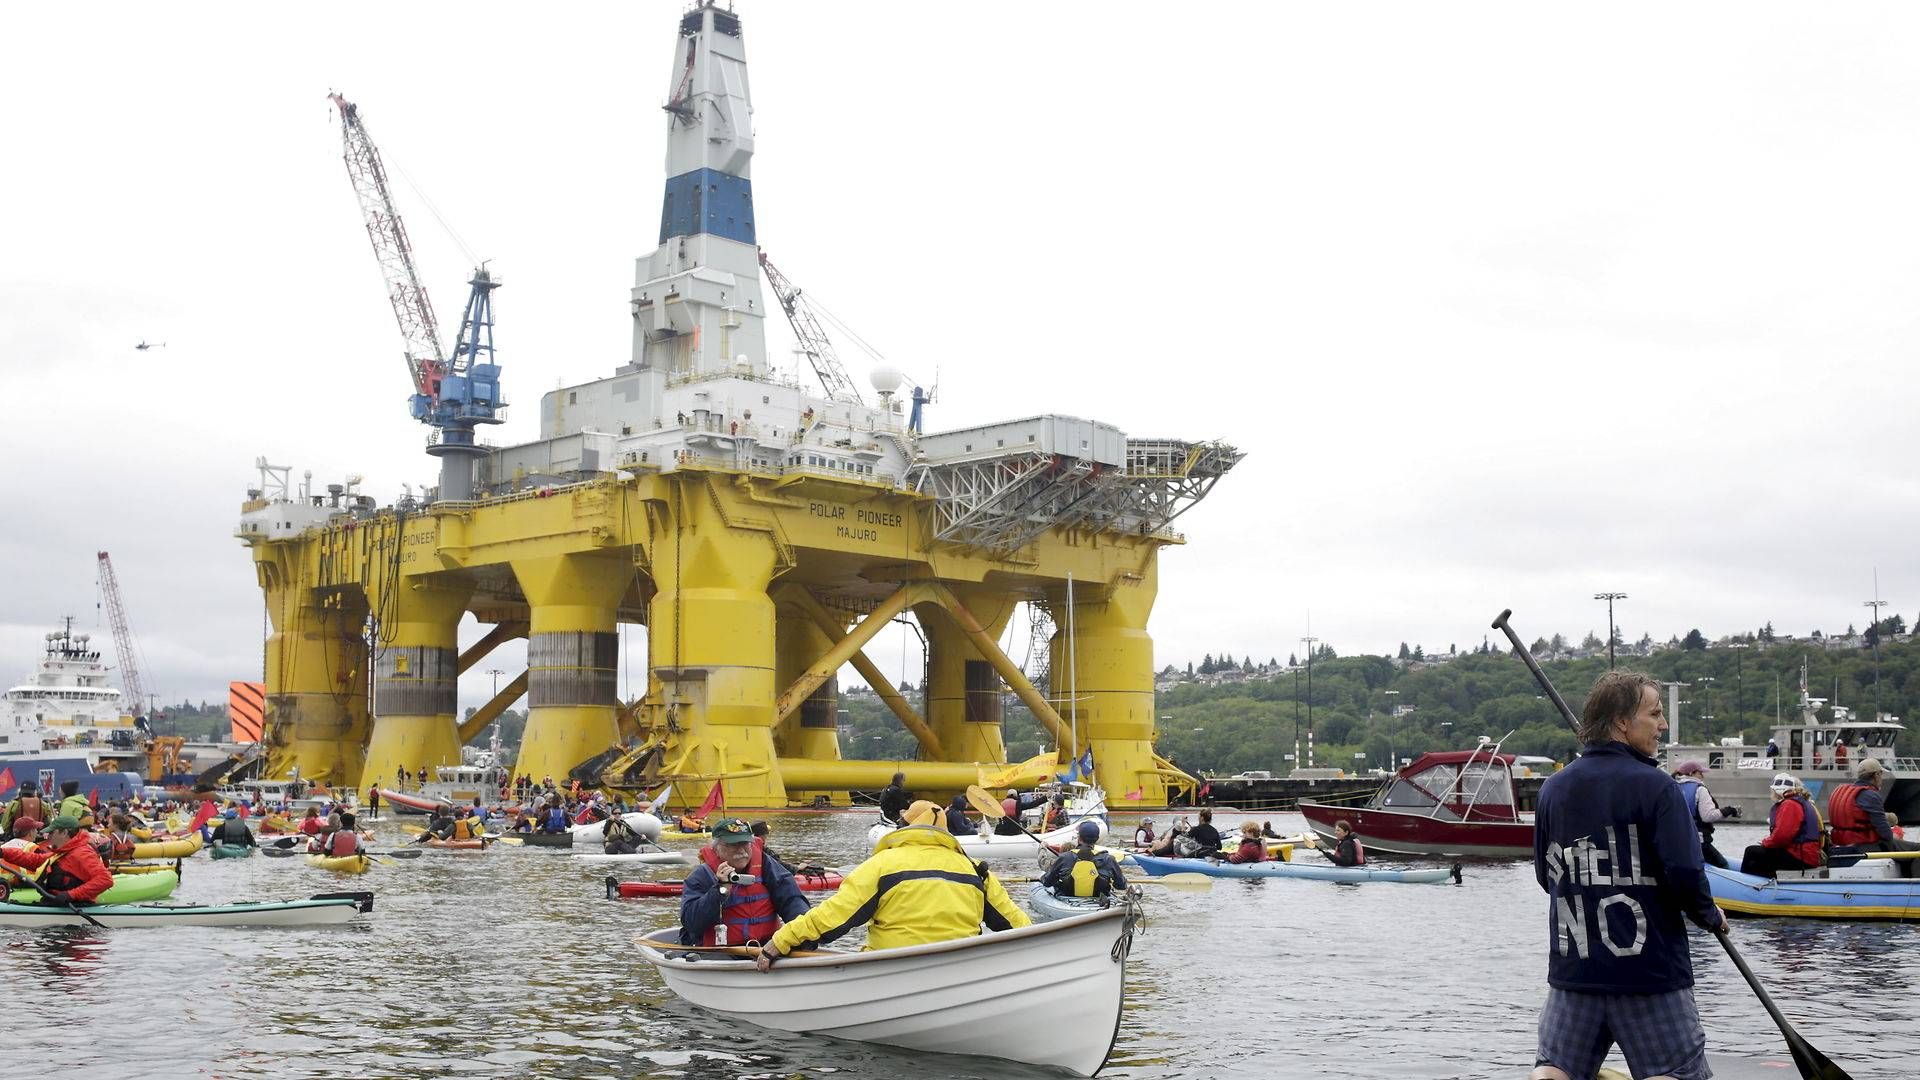 Protesters gather on the water near Shell's Polar Pioneer oil rig at the Port of Seattle. The climate struggle will henceforth entail more legal fighting and less direct action, says Greenpeace. | Photo: Jason Redmond/Reuters/Ritzau Scanpix